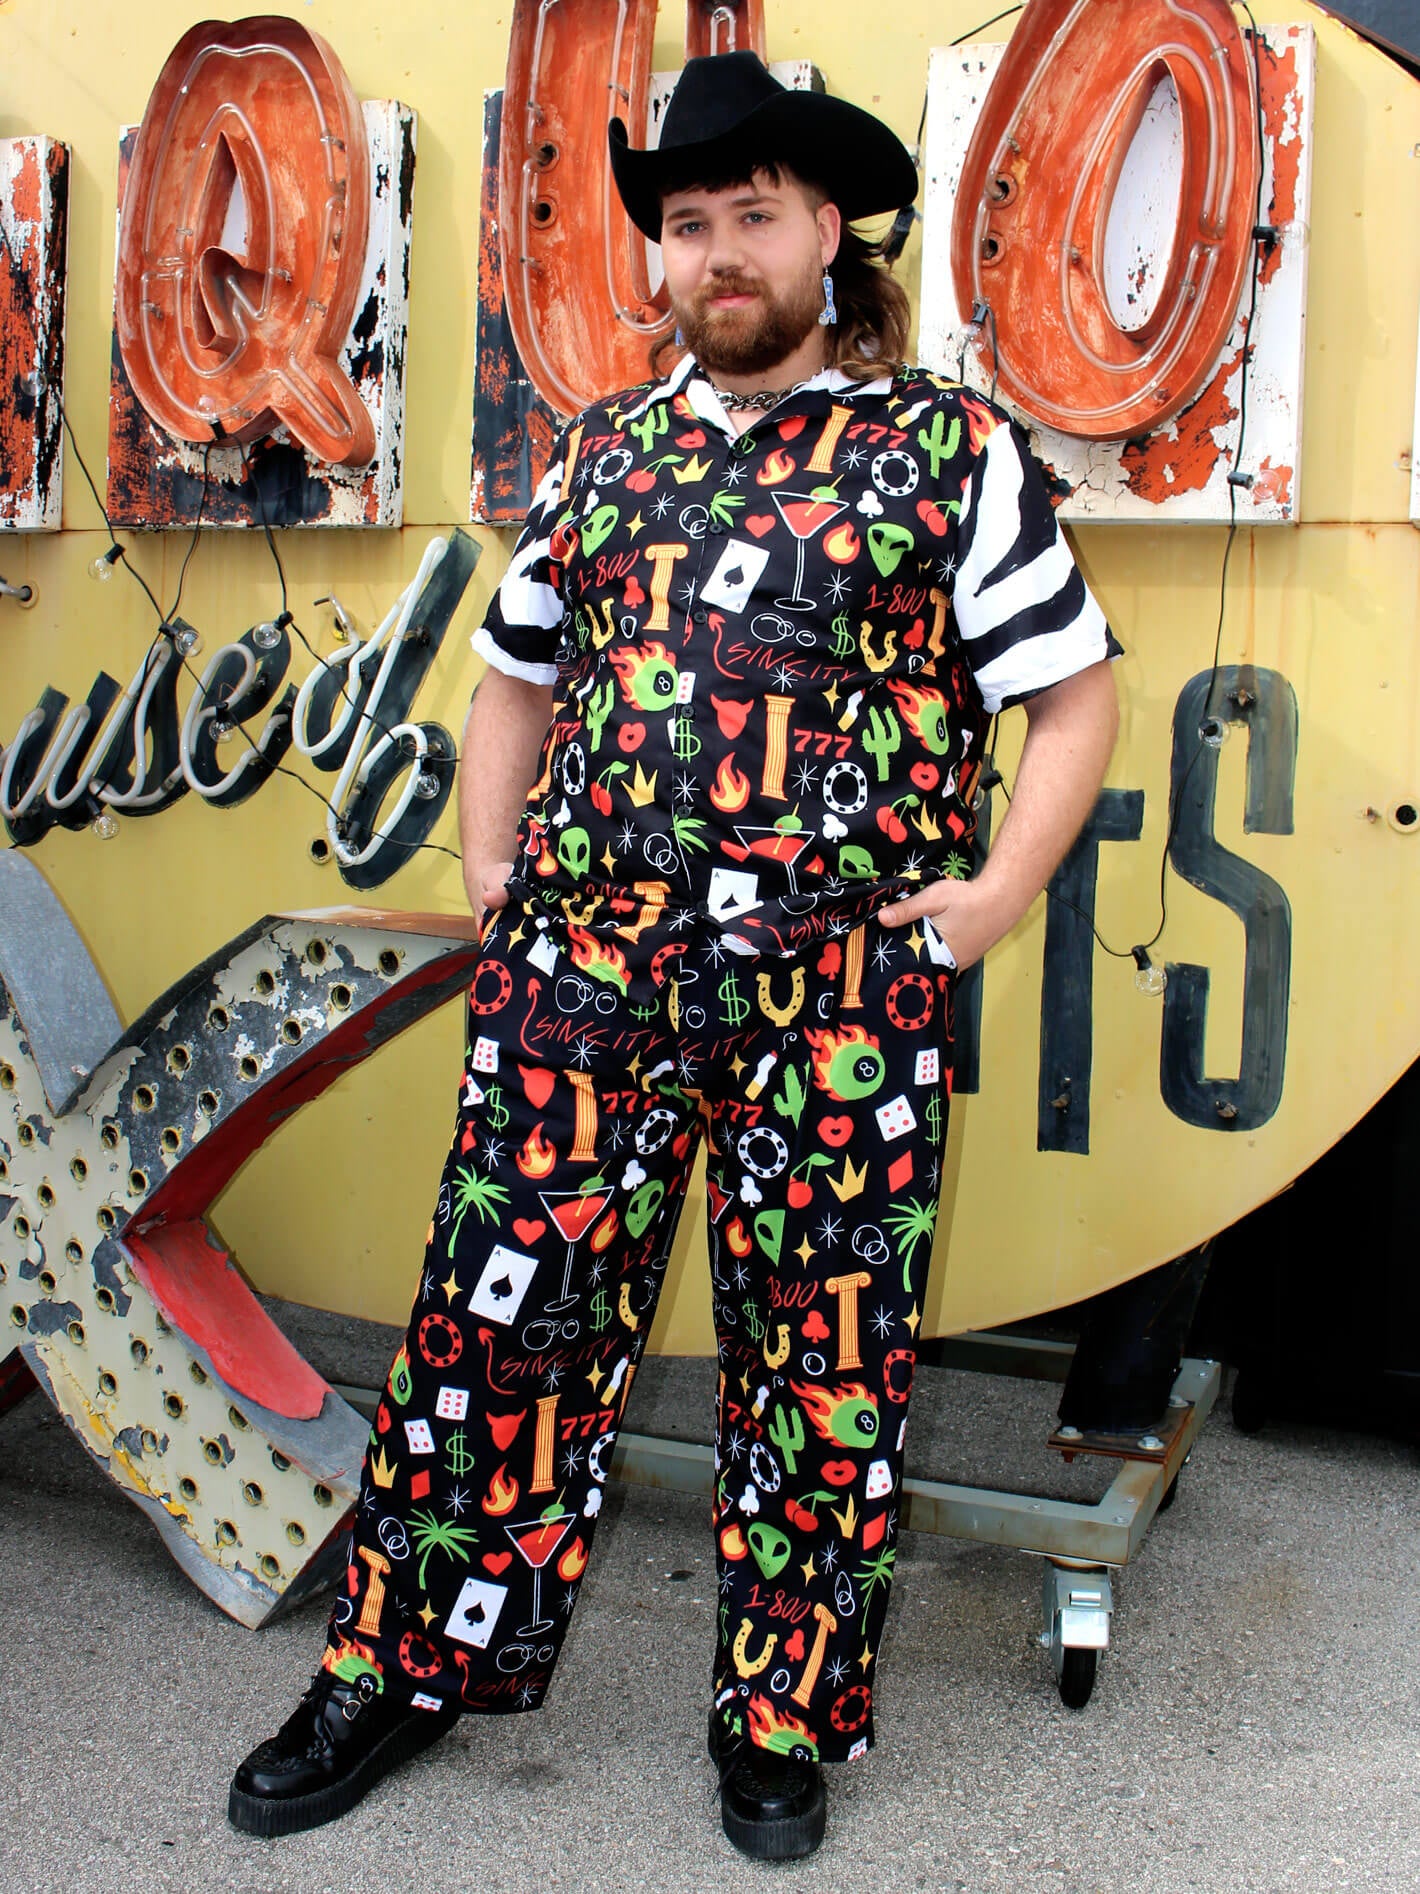 Kitschy queer plus size pants and shirt.